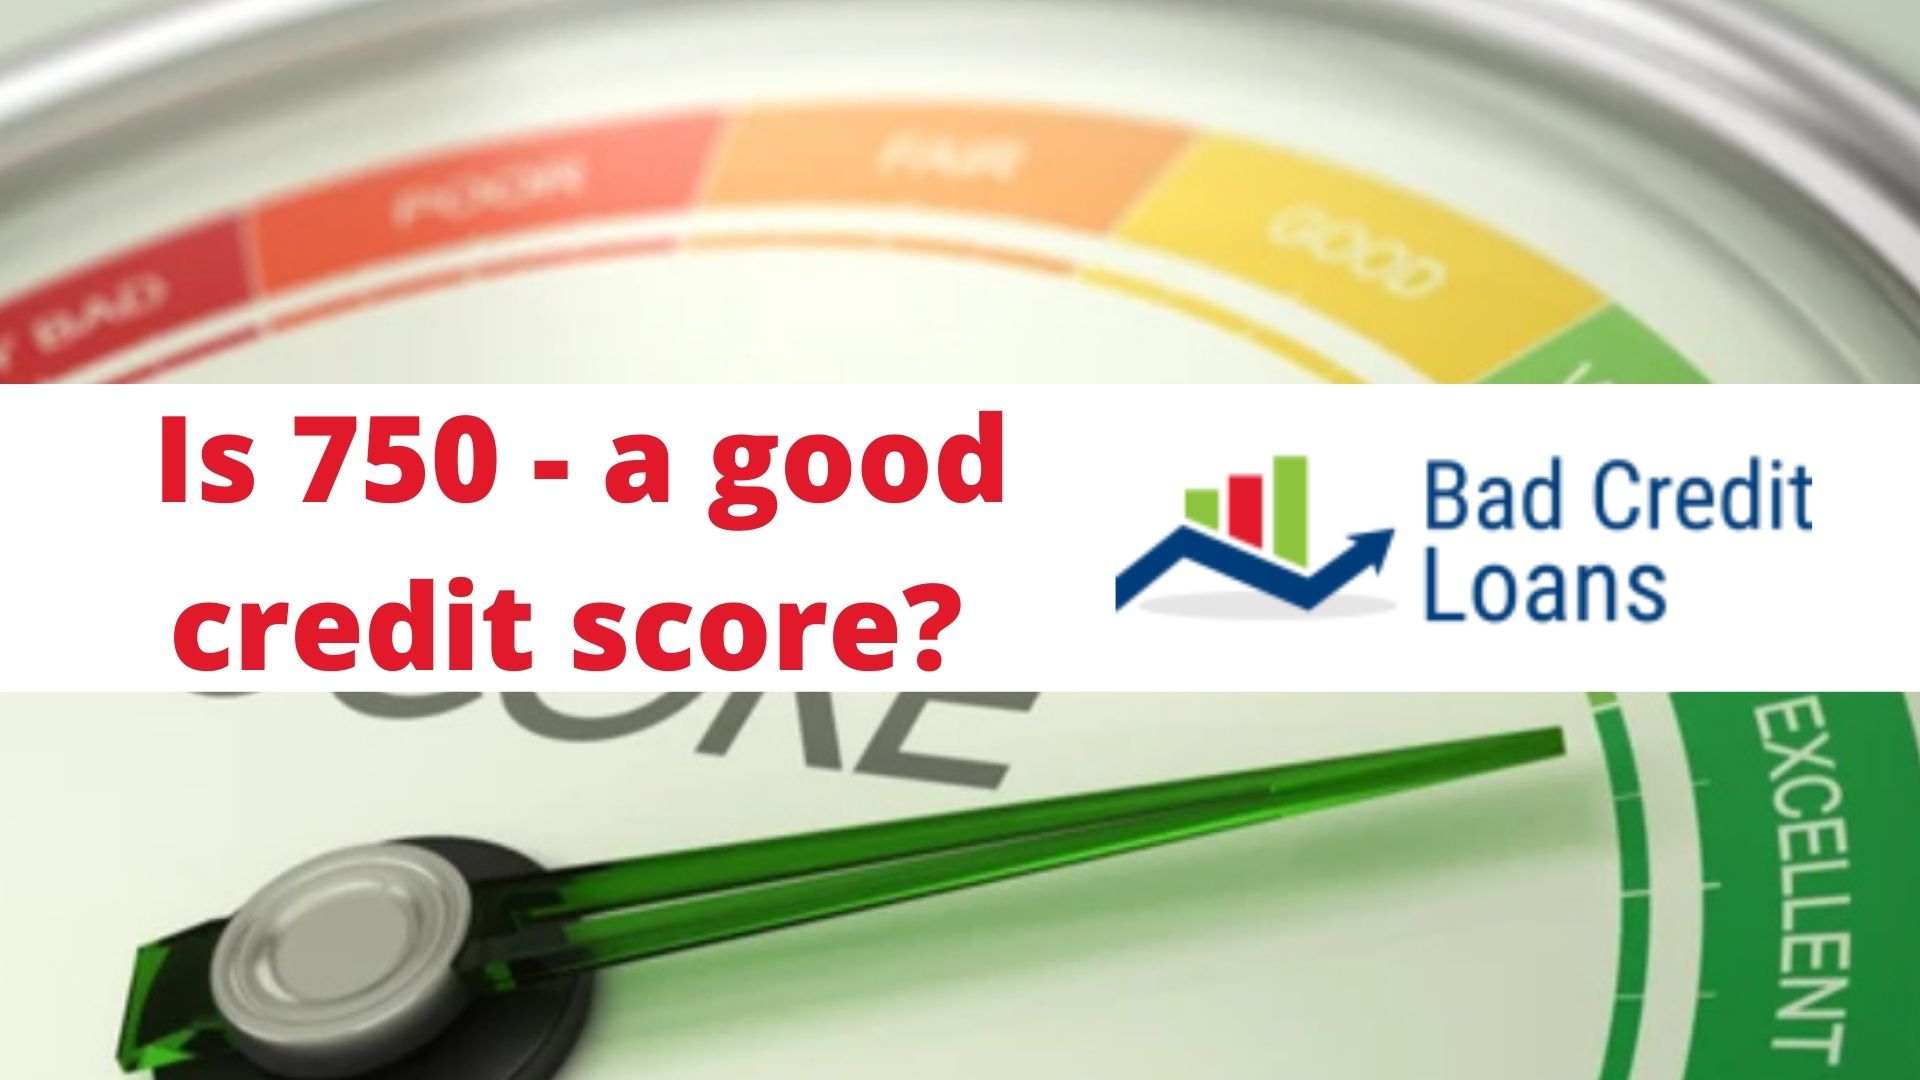 Is 750 a good credit score?